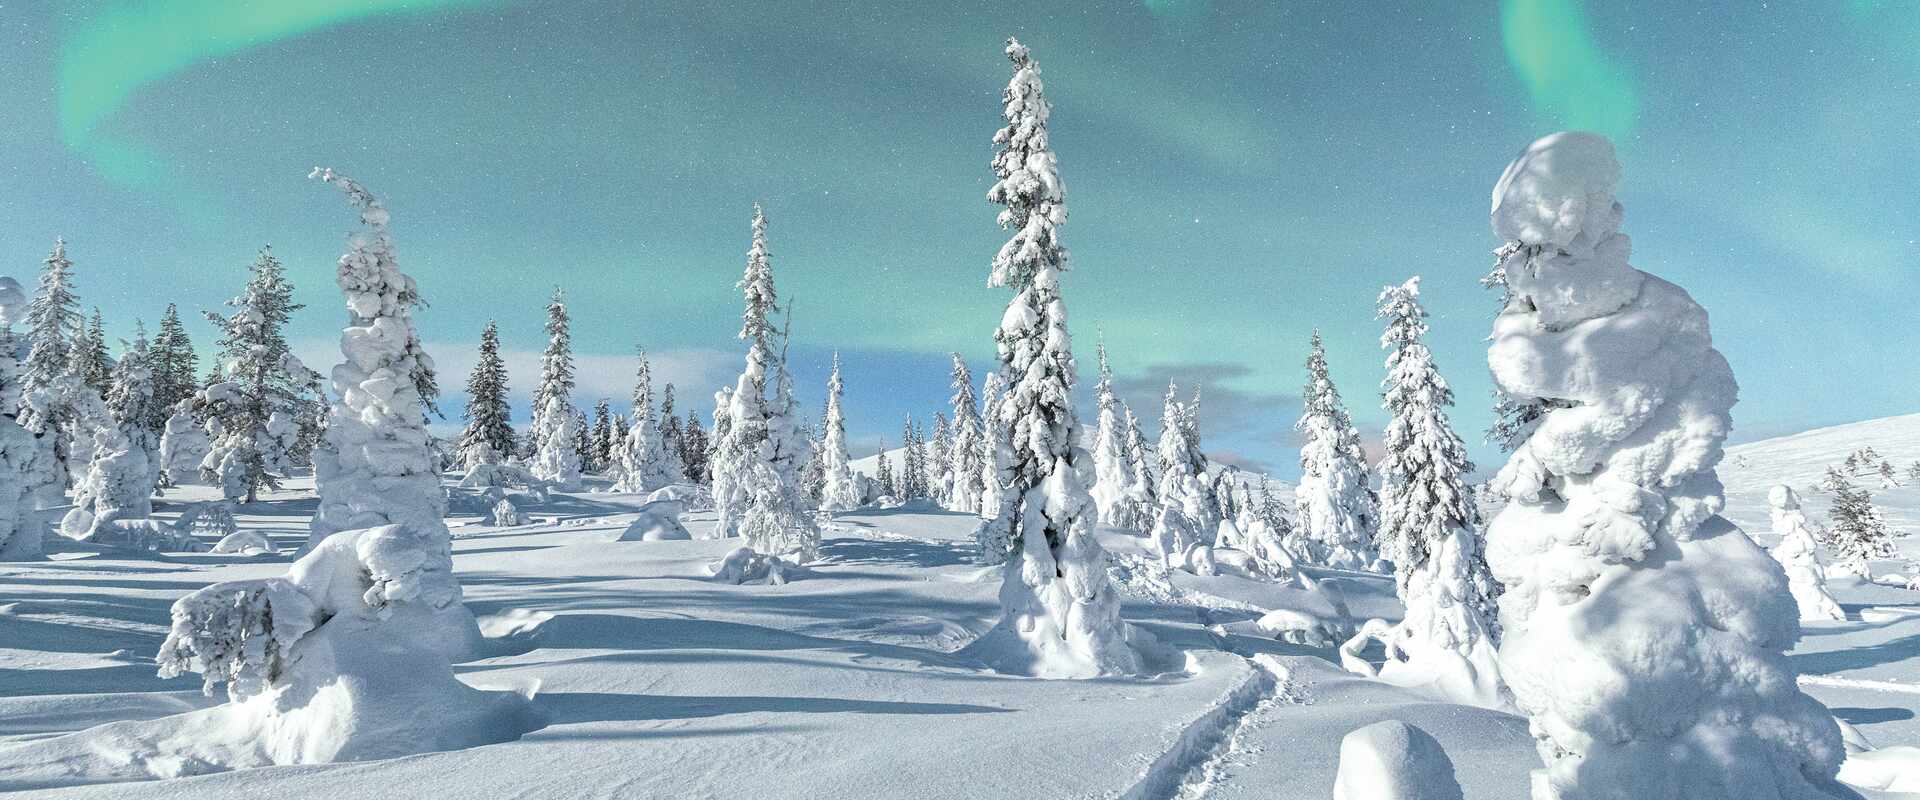 A forest blanketed in thick snow in Lapland, Finland